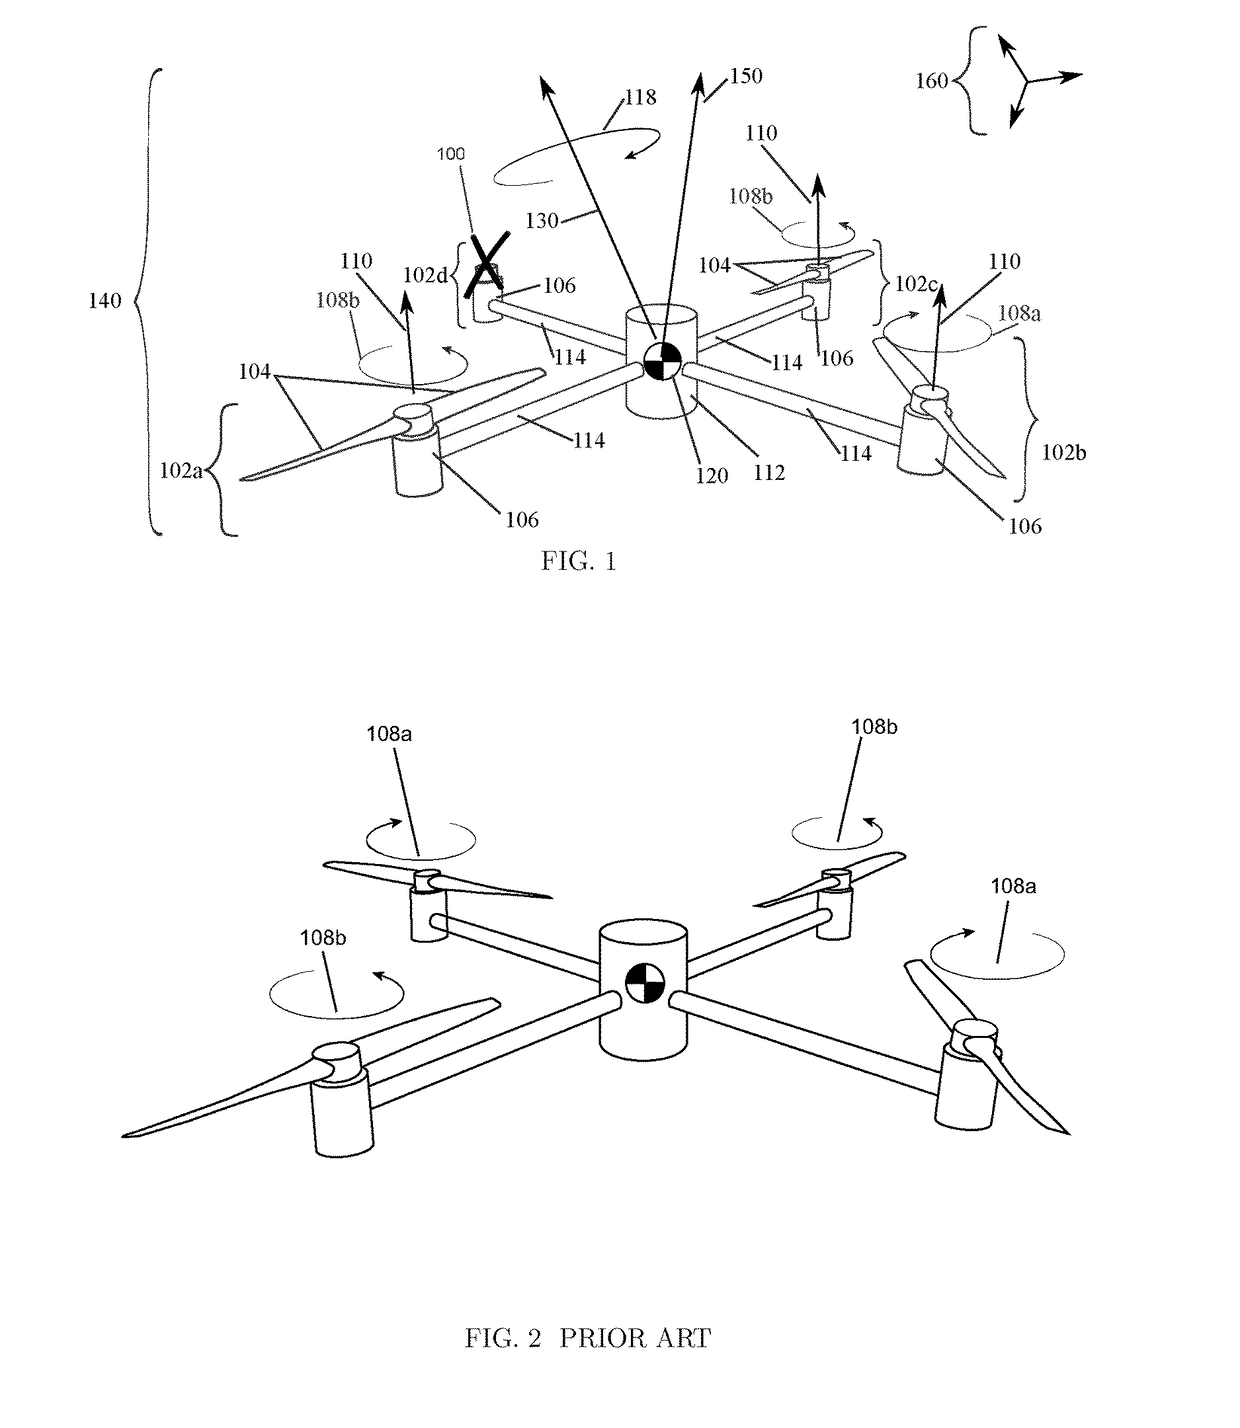 Controlled flight of a multicopter experiencing a failure affecting an effector